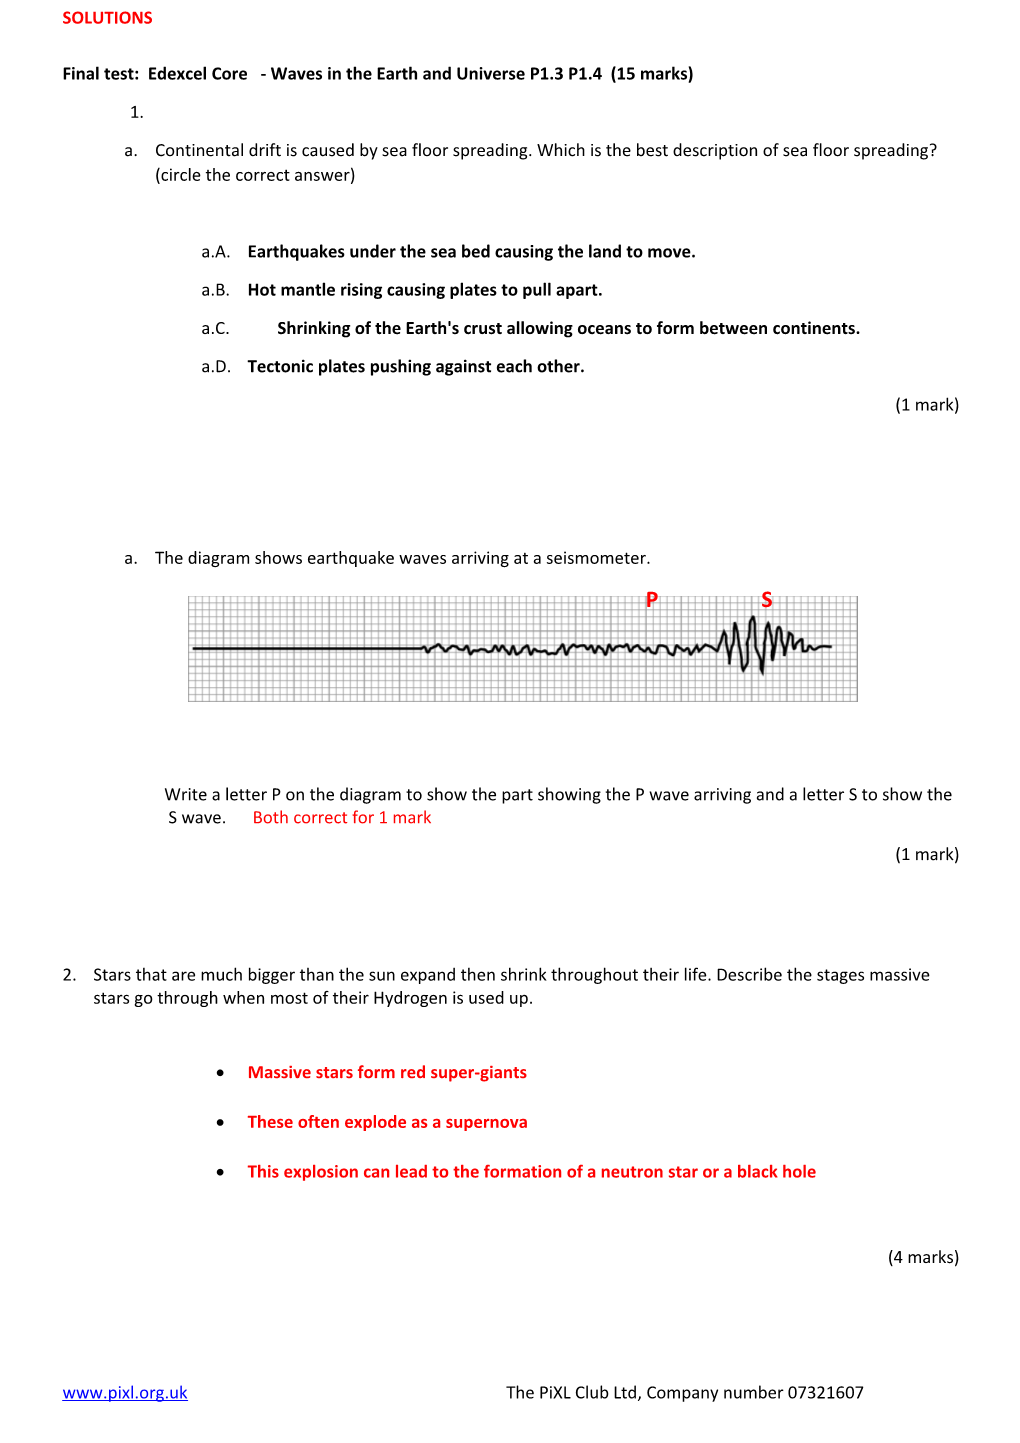 Final Test: Edexcel Core - Waves in the Earth and Universe P1.3 P1.4 (15 Marks)